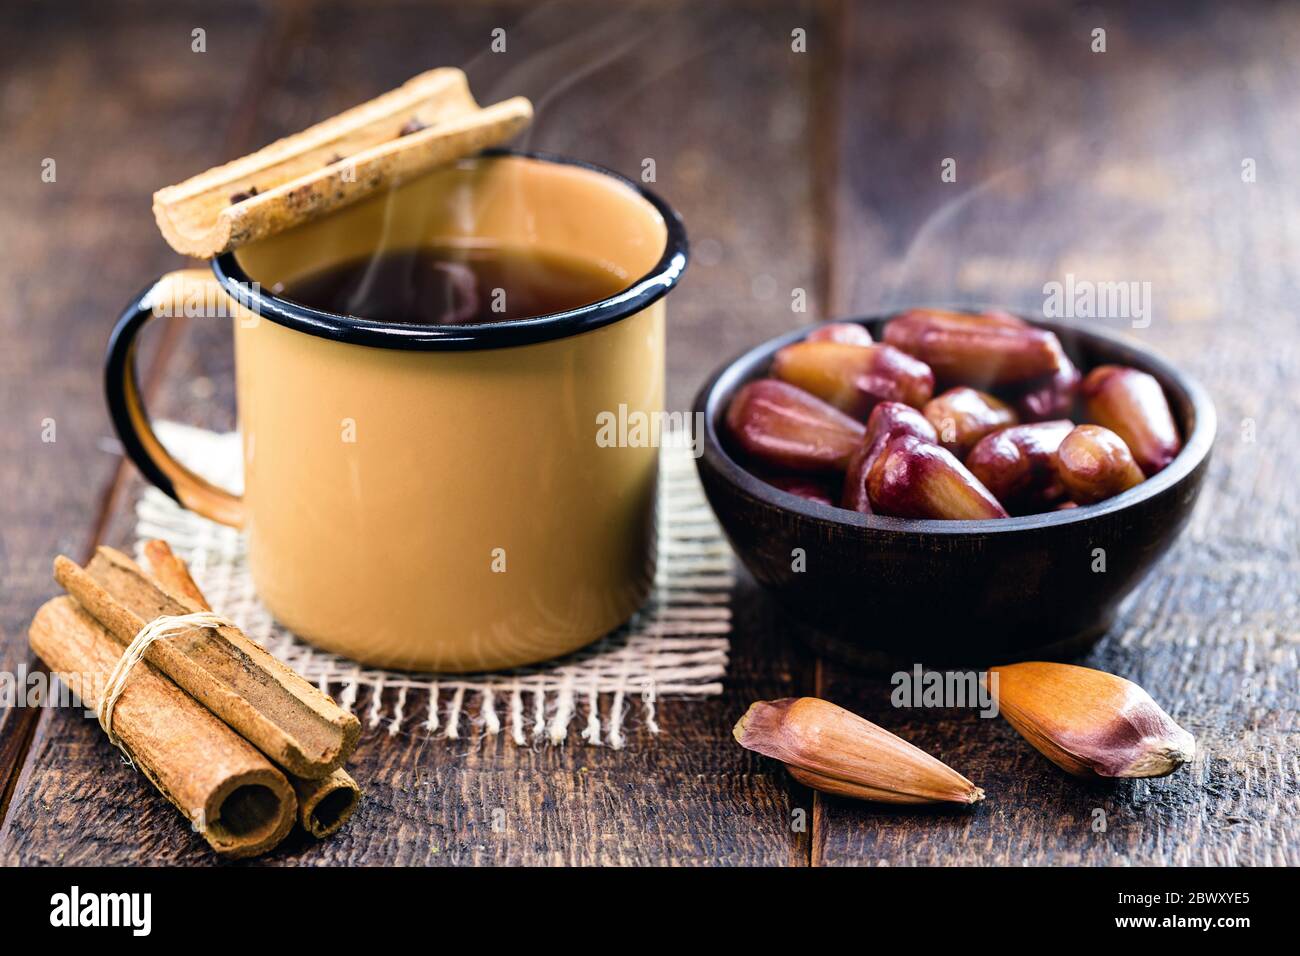 hot Brazilian wine, called "quentão", together with a portion of "pinhão" Brazilian seed cooked and served hot, drink and typical Brazilian winter foo Stock Photo